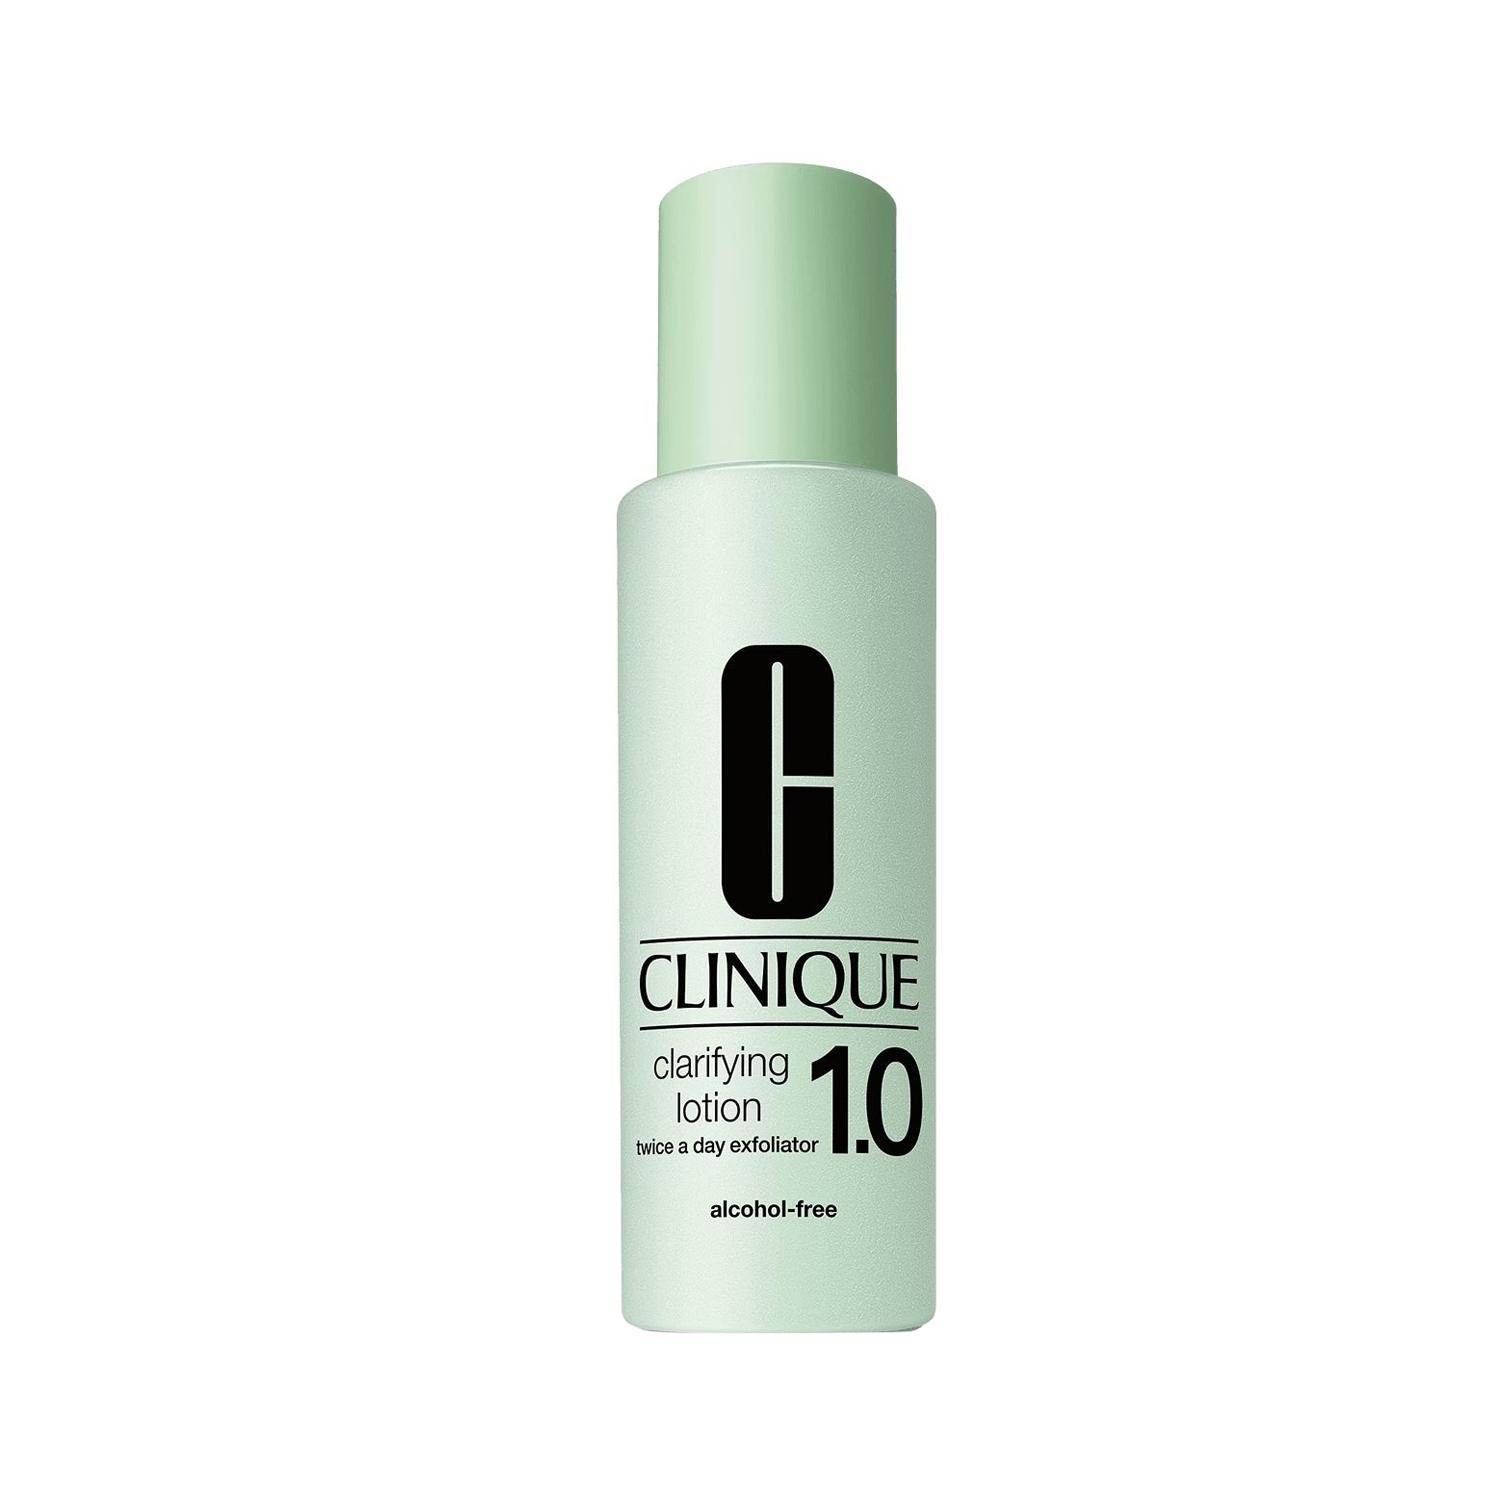 clinique clarifying lotion 1.0 (200ml)